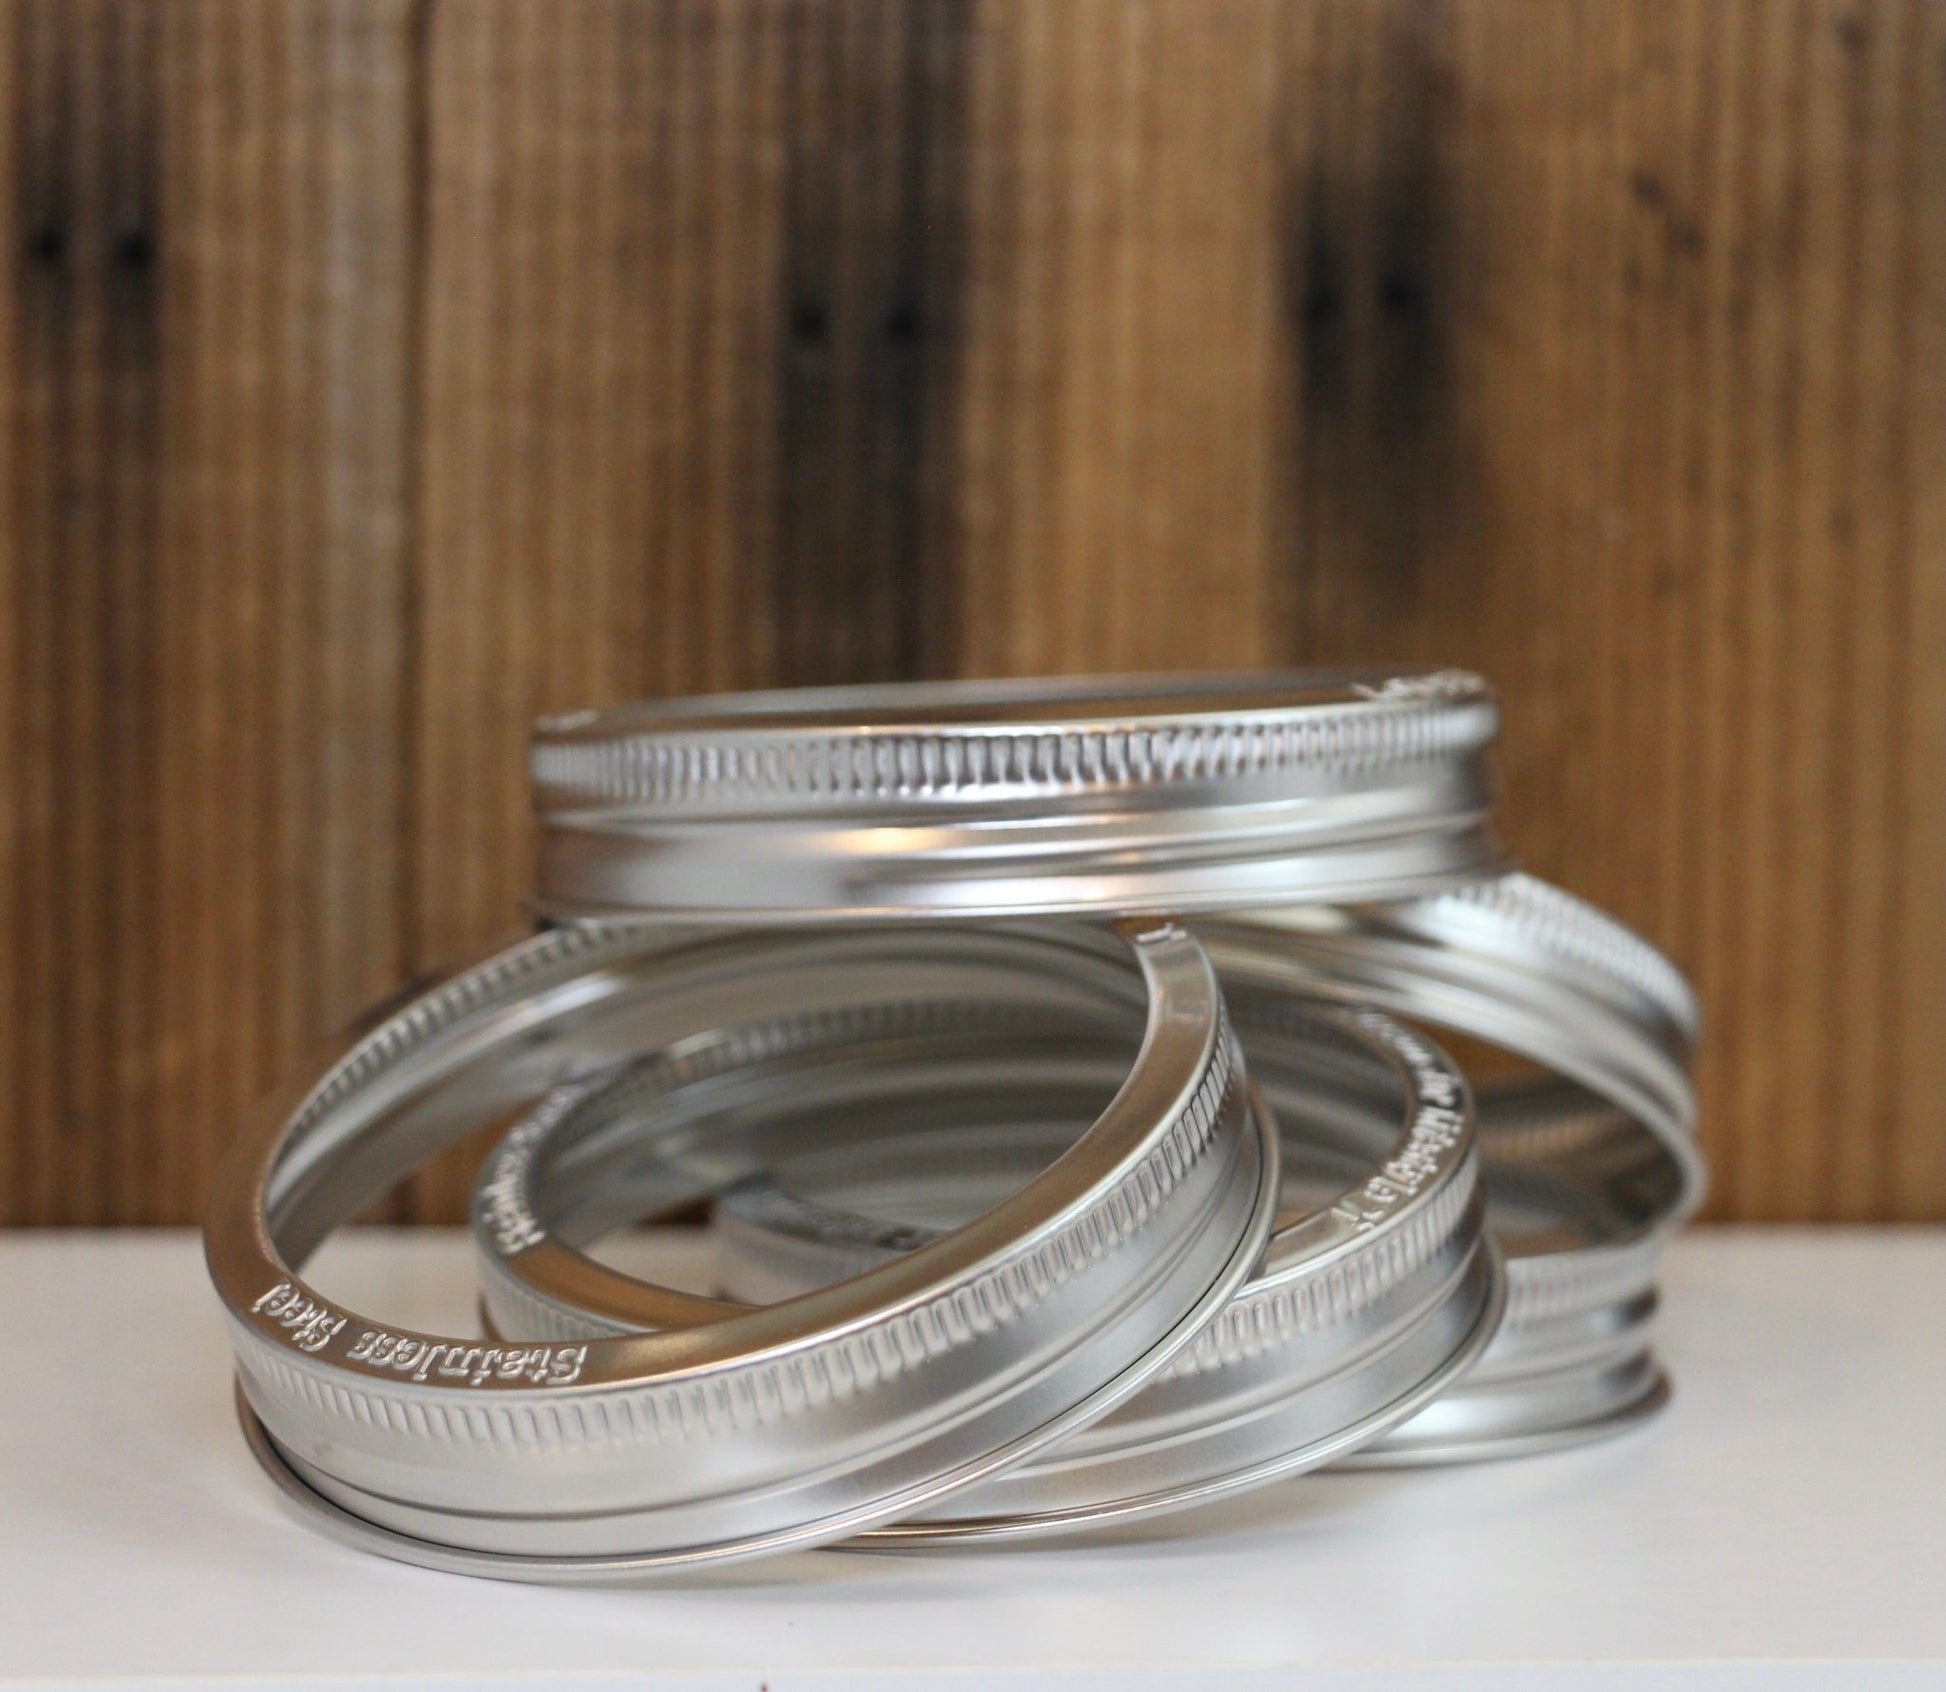 Mason Jar Pump Lid - From Soaps to Condiments